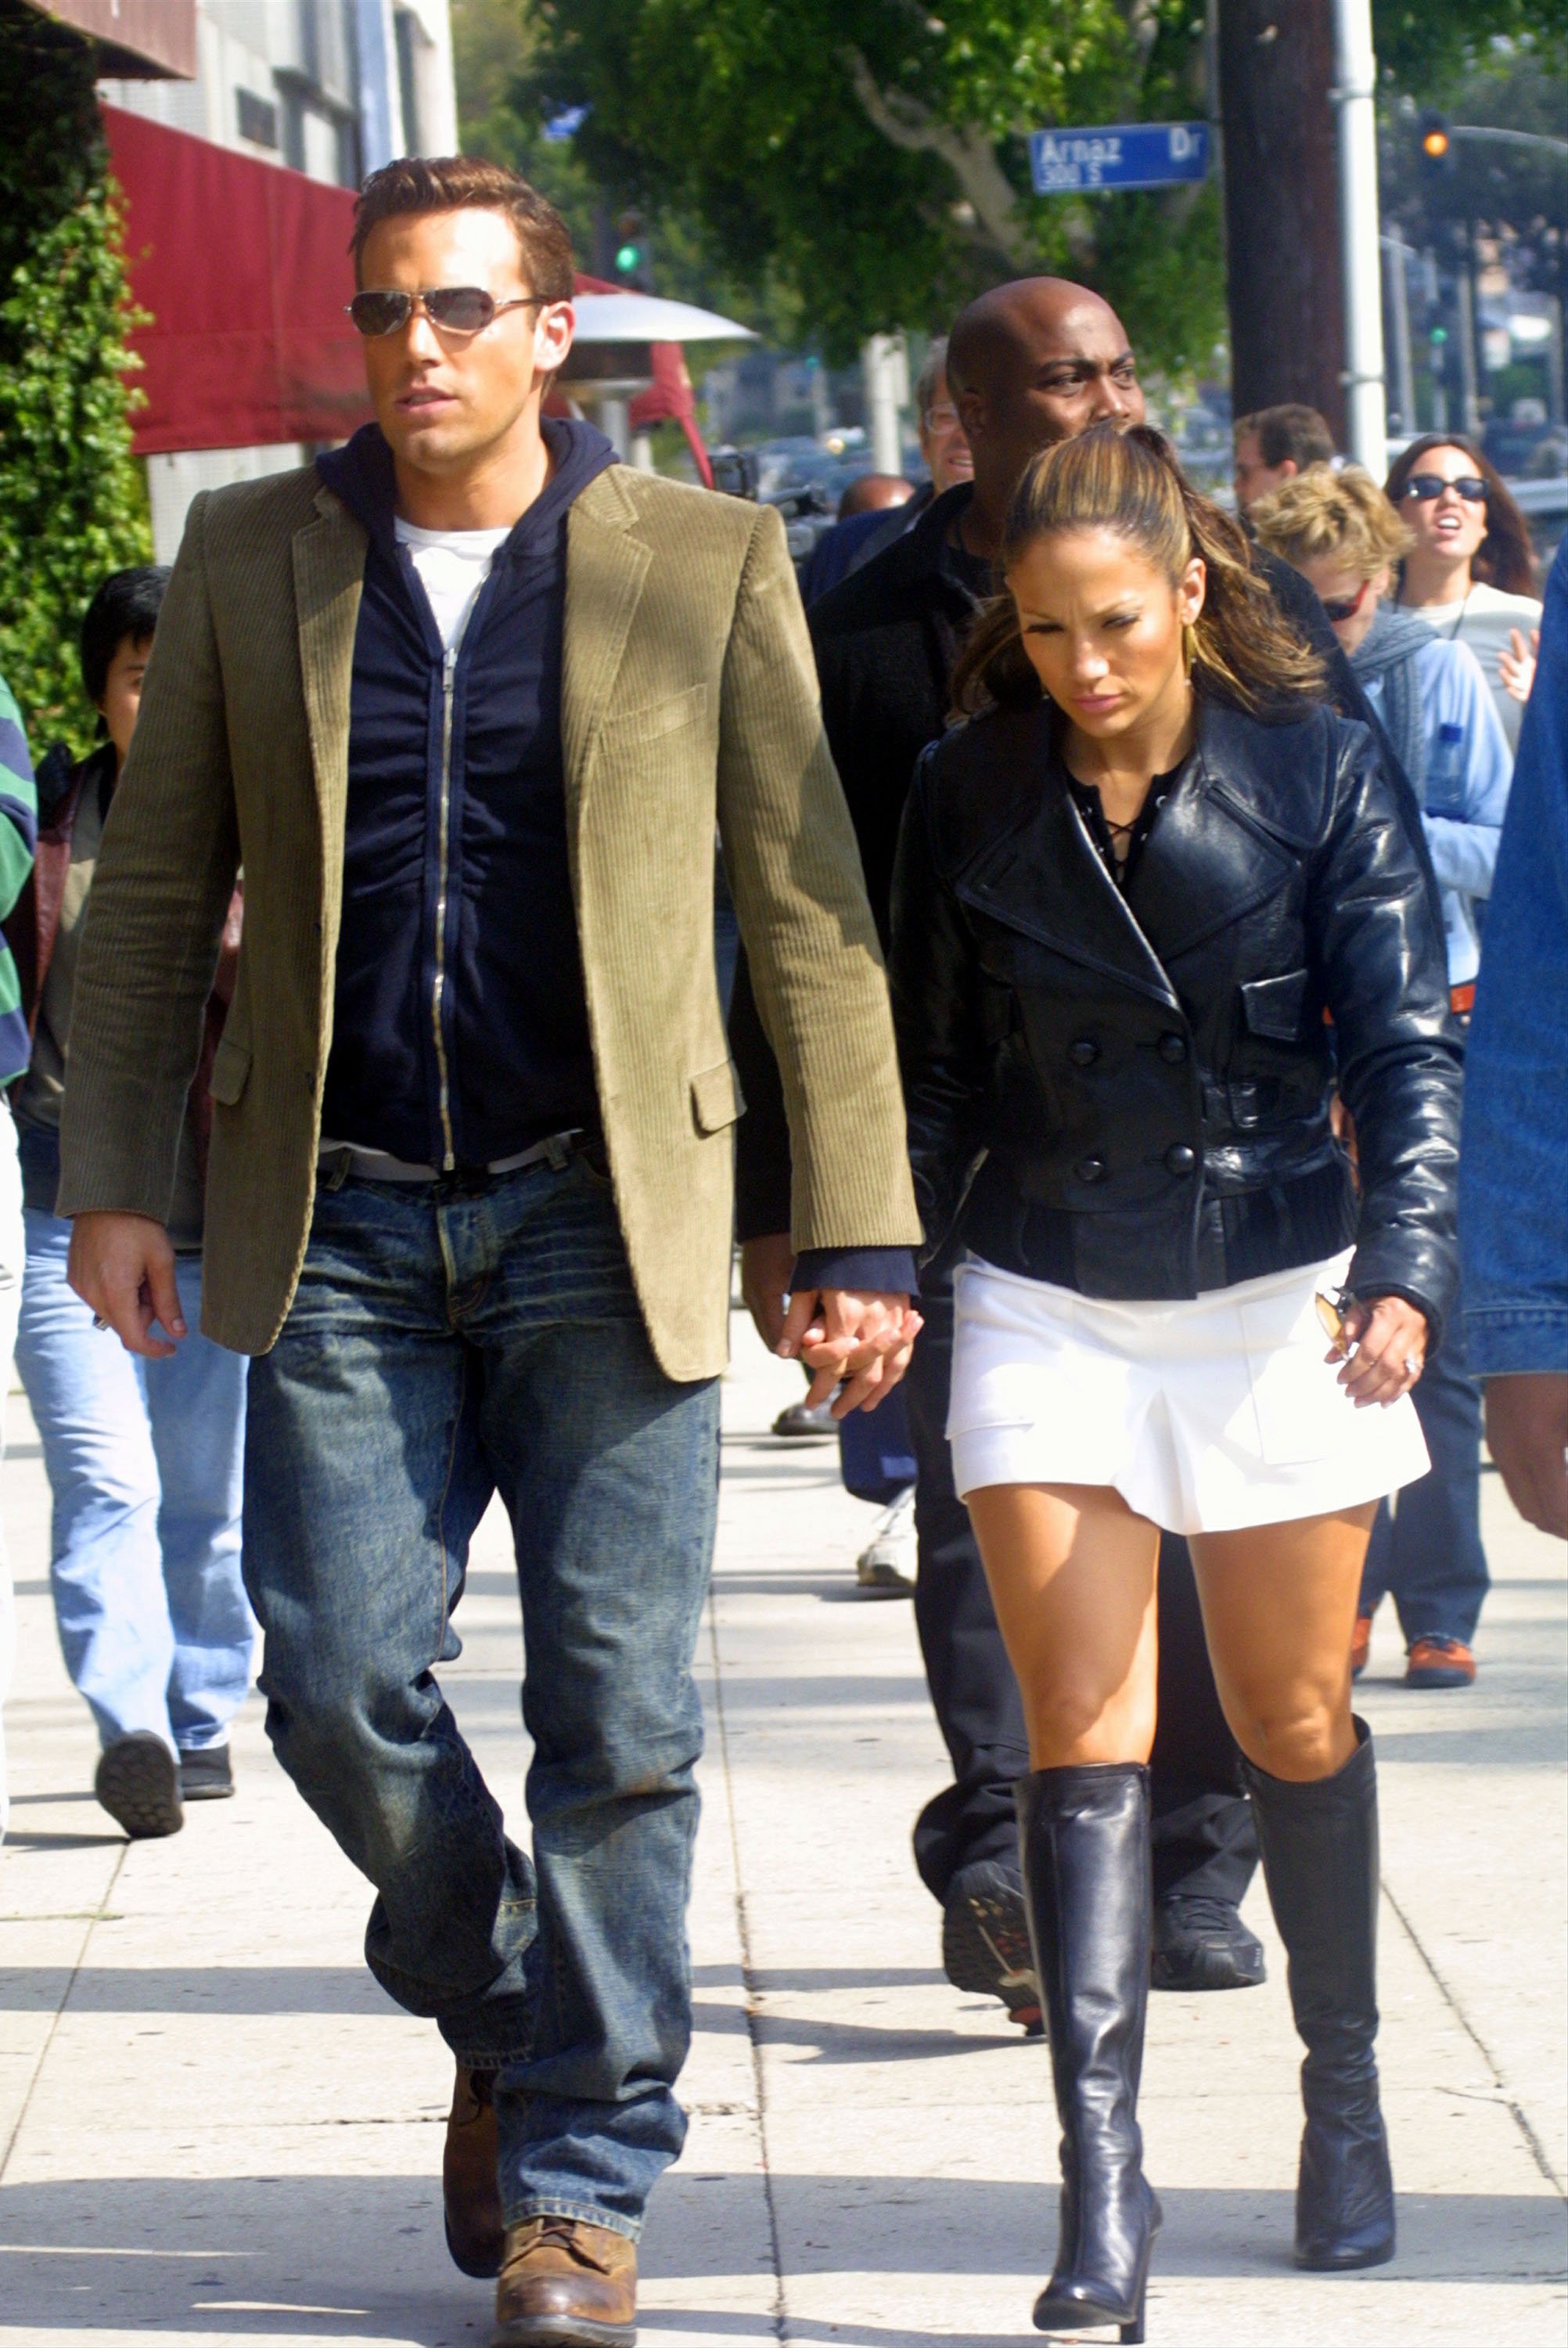 Actress/singer Jennifer Lopez and actor Ben Affleck hold hands while filming her new music video at Barefoot restaurant on October 20, 2002 in Beverly Hills, California | Source: Getty Images